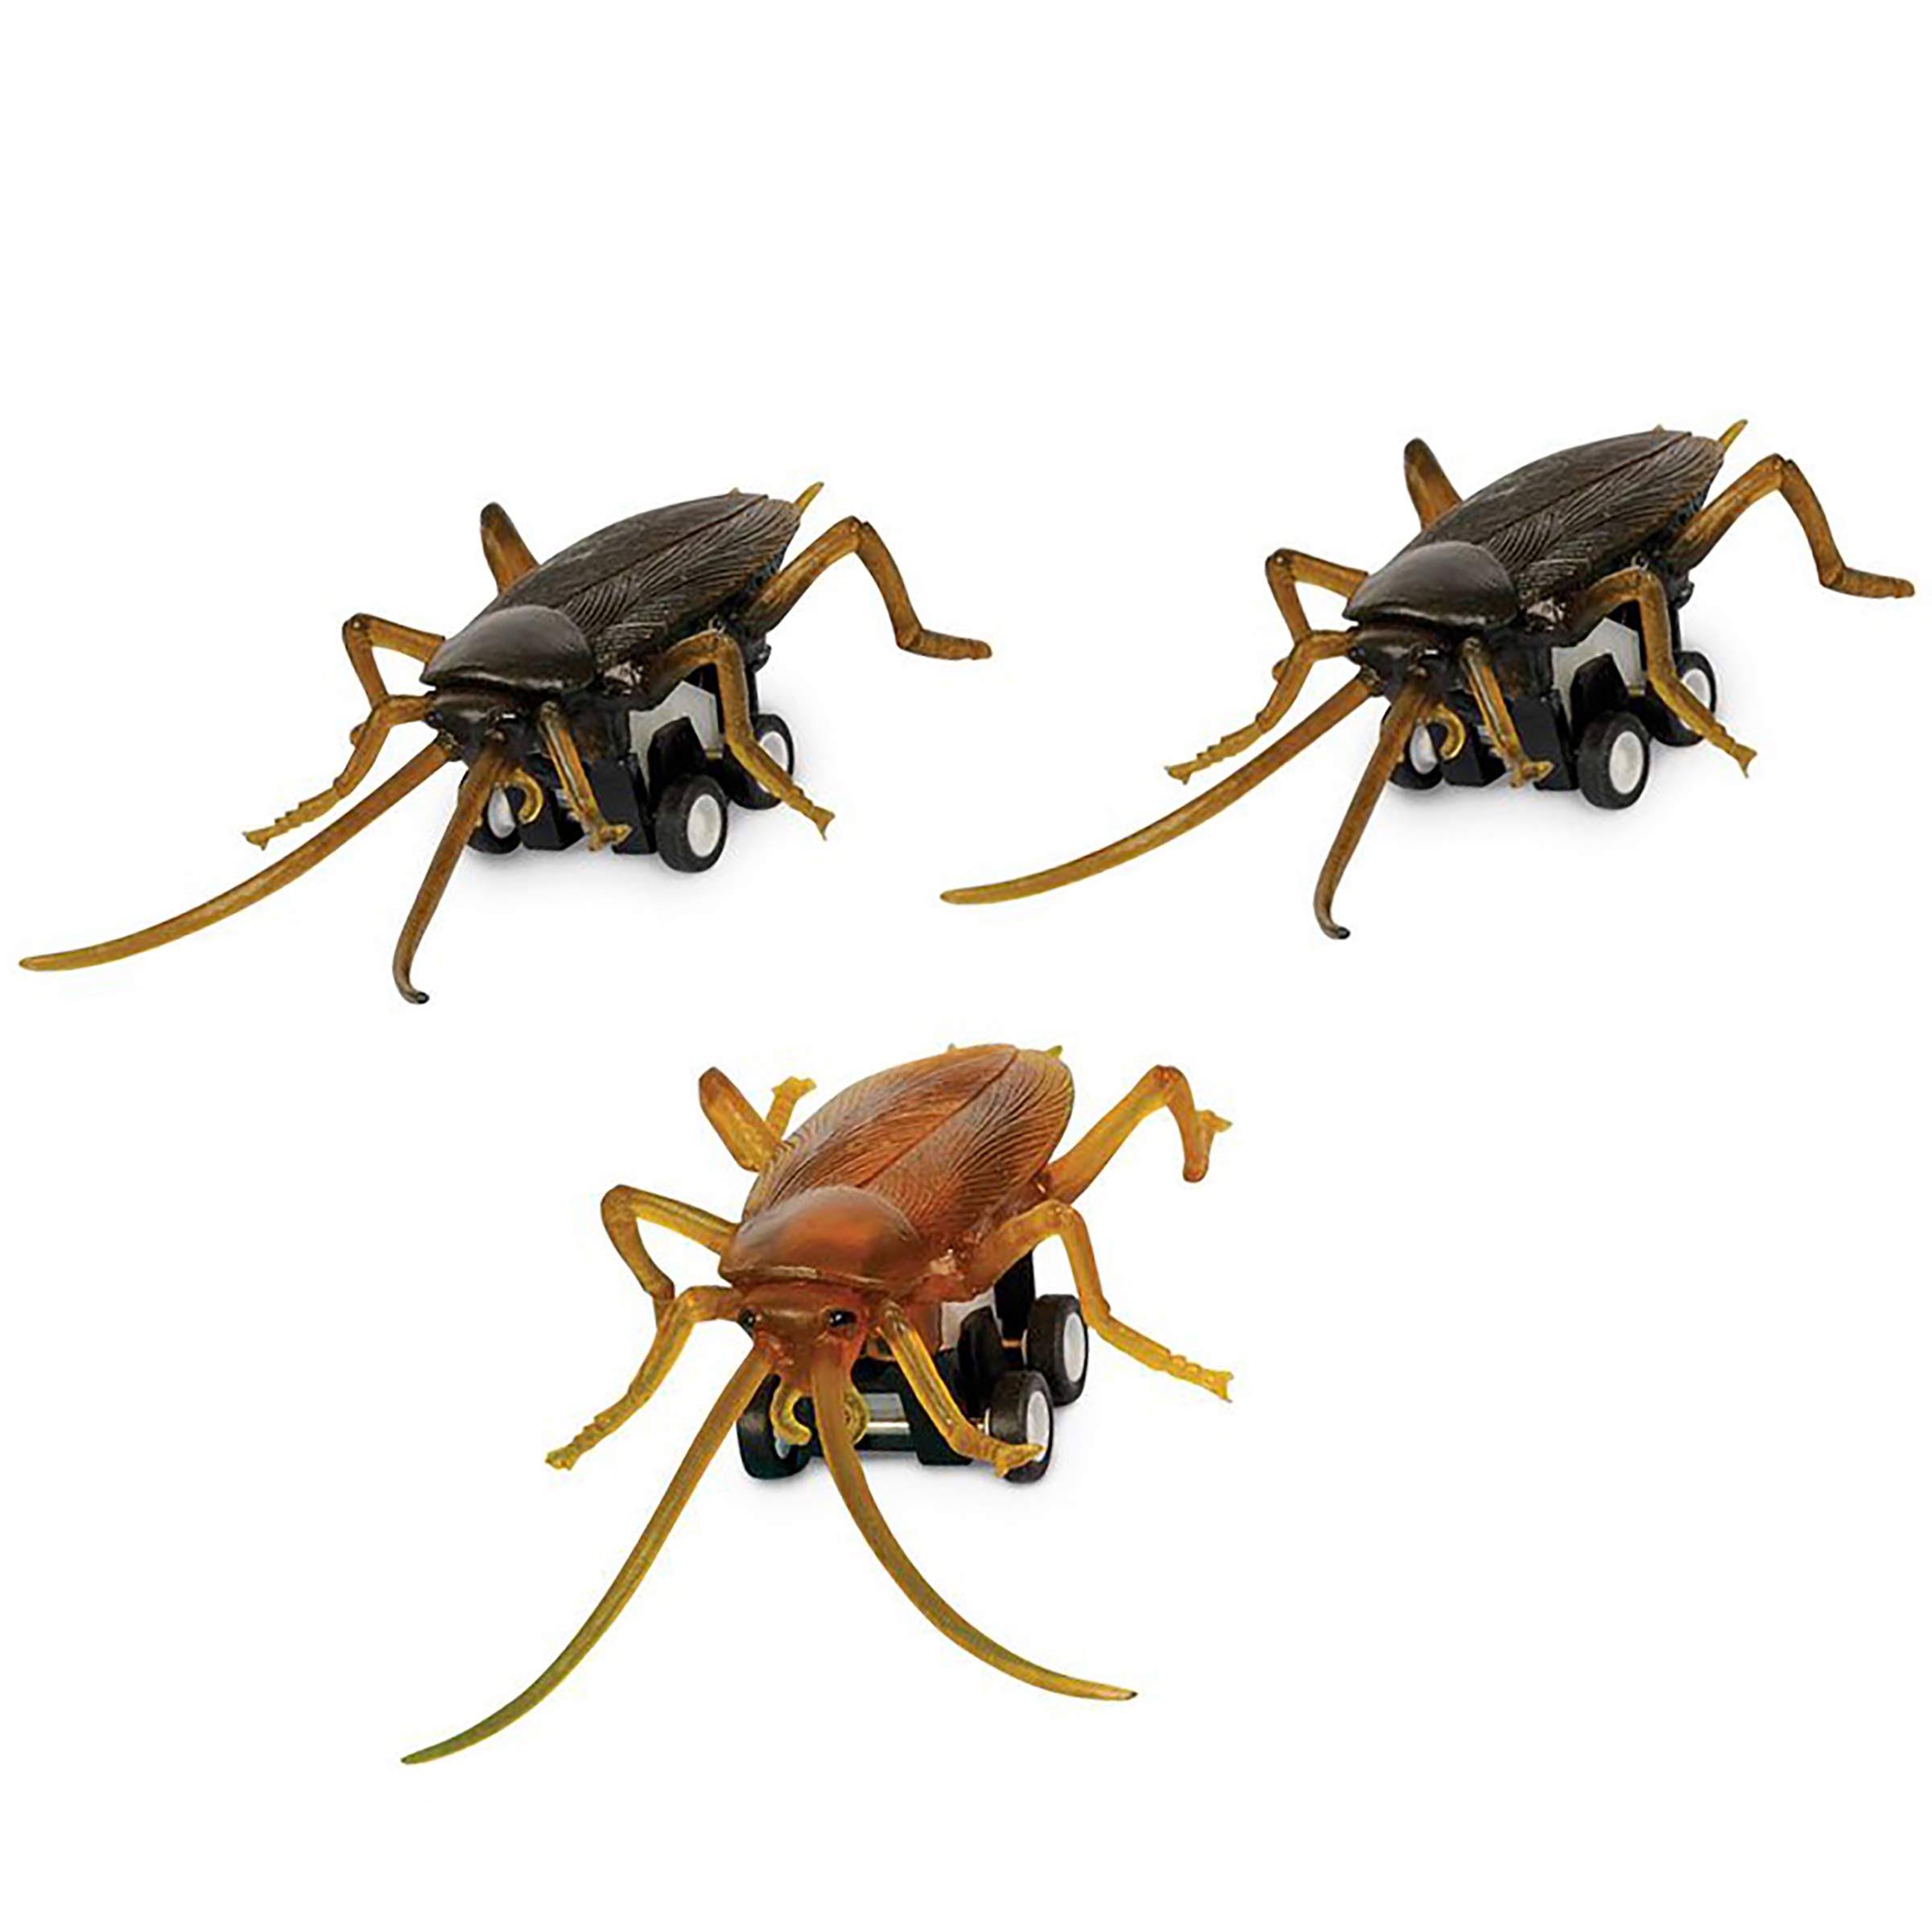 Archie McPhee Novelty Gag Gift Racing Roaches 3 Piece Set